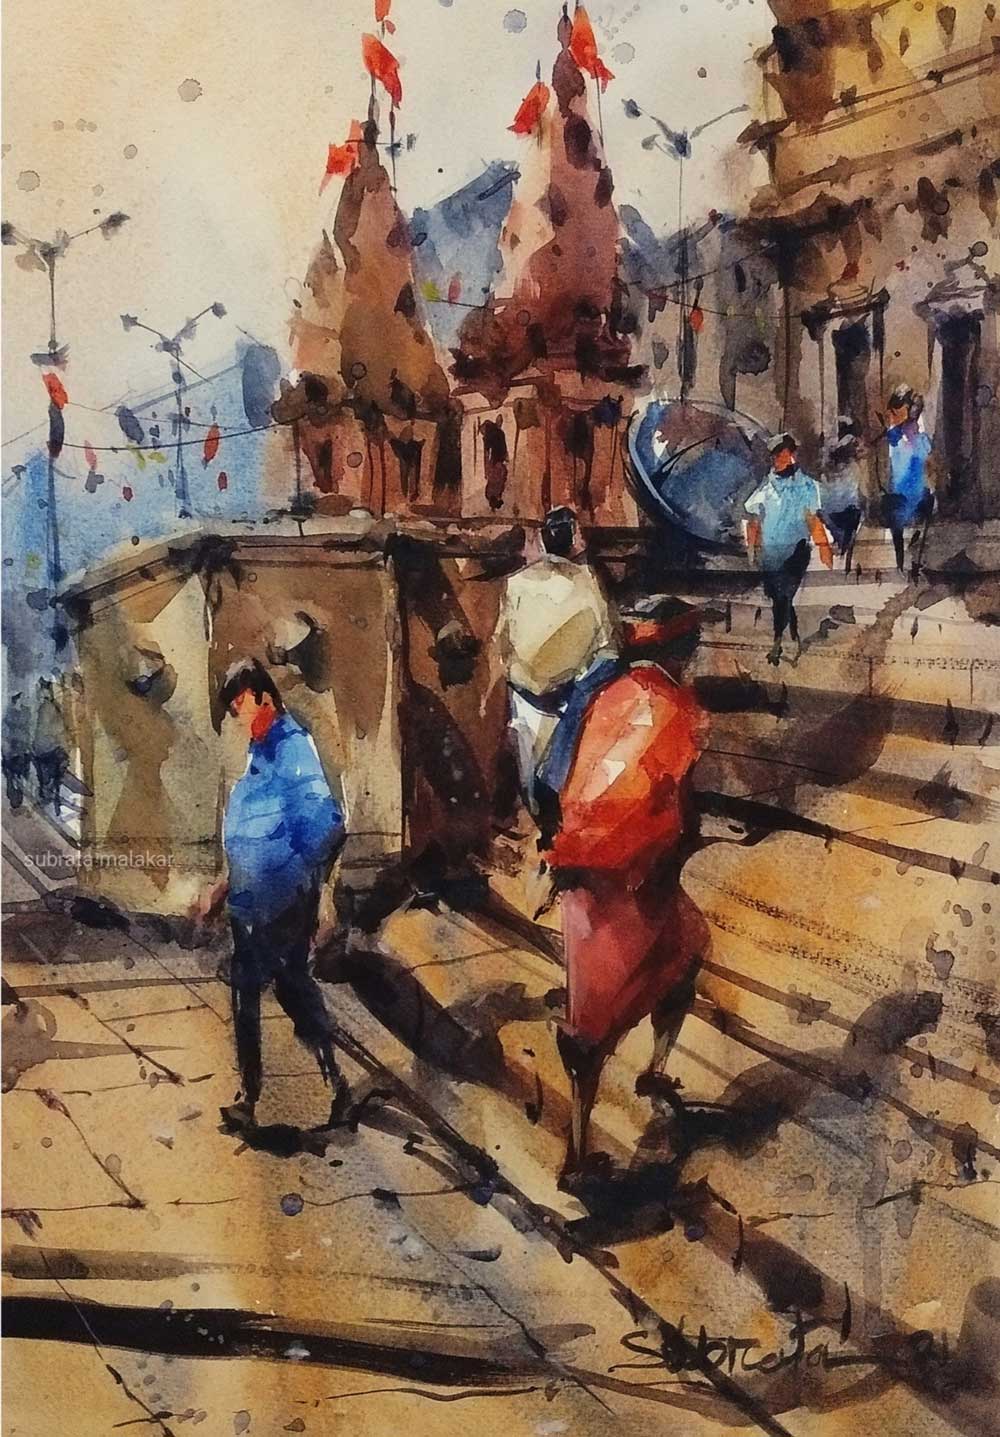 Figurative Painting with Watercolor on Paper "Untitled-8" art by Subrata Malakar